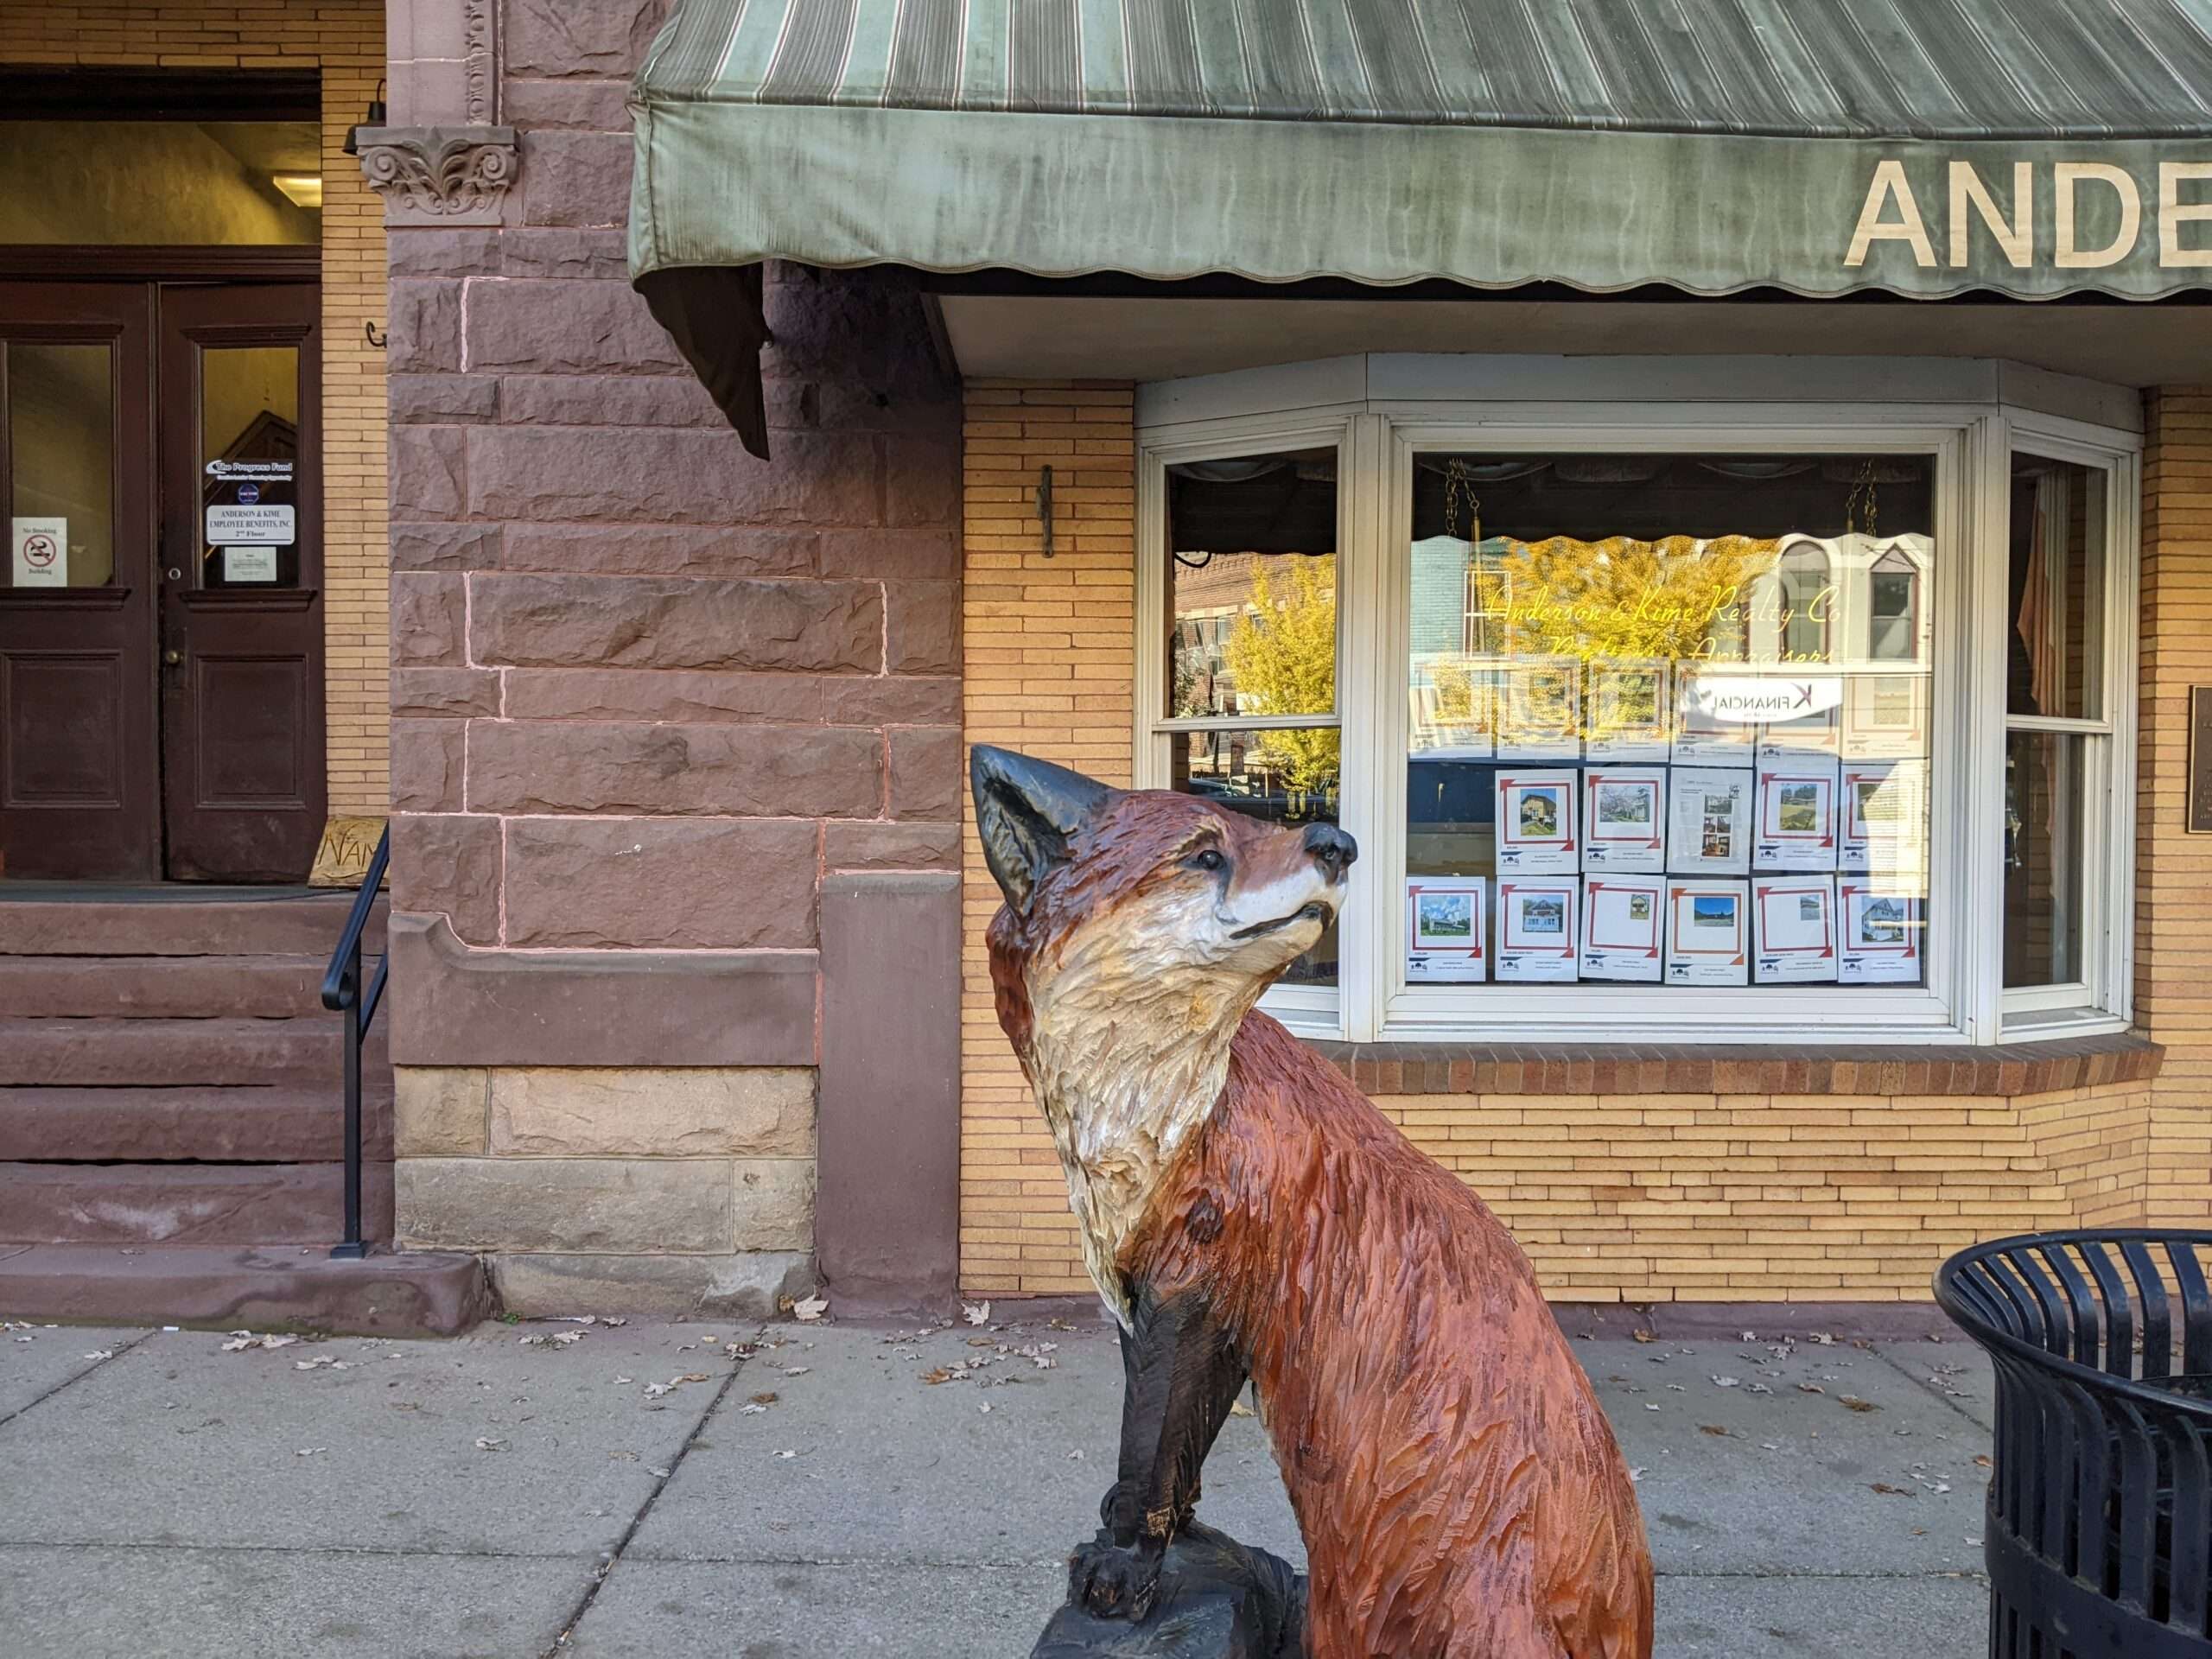 Carving of a fox in front of a storefront in Appalachia